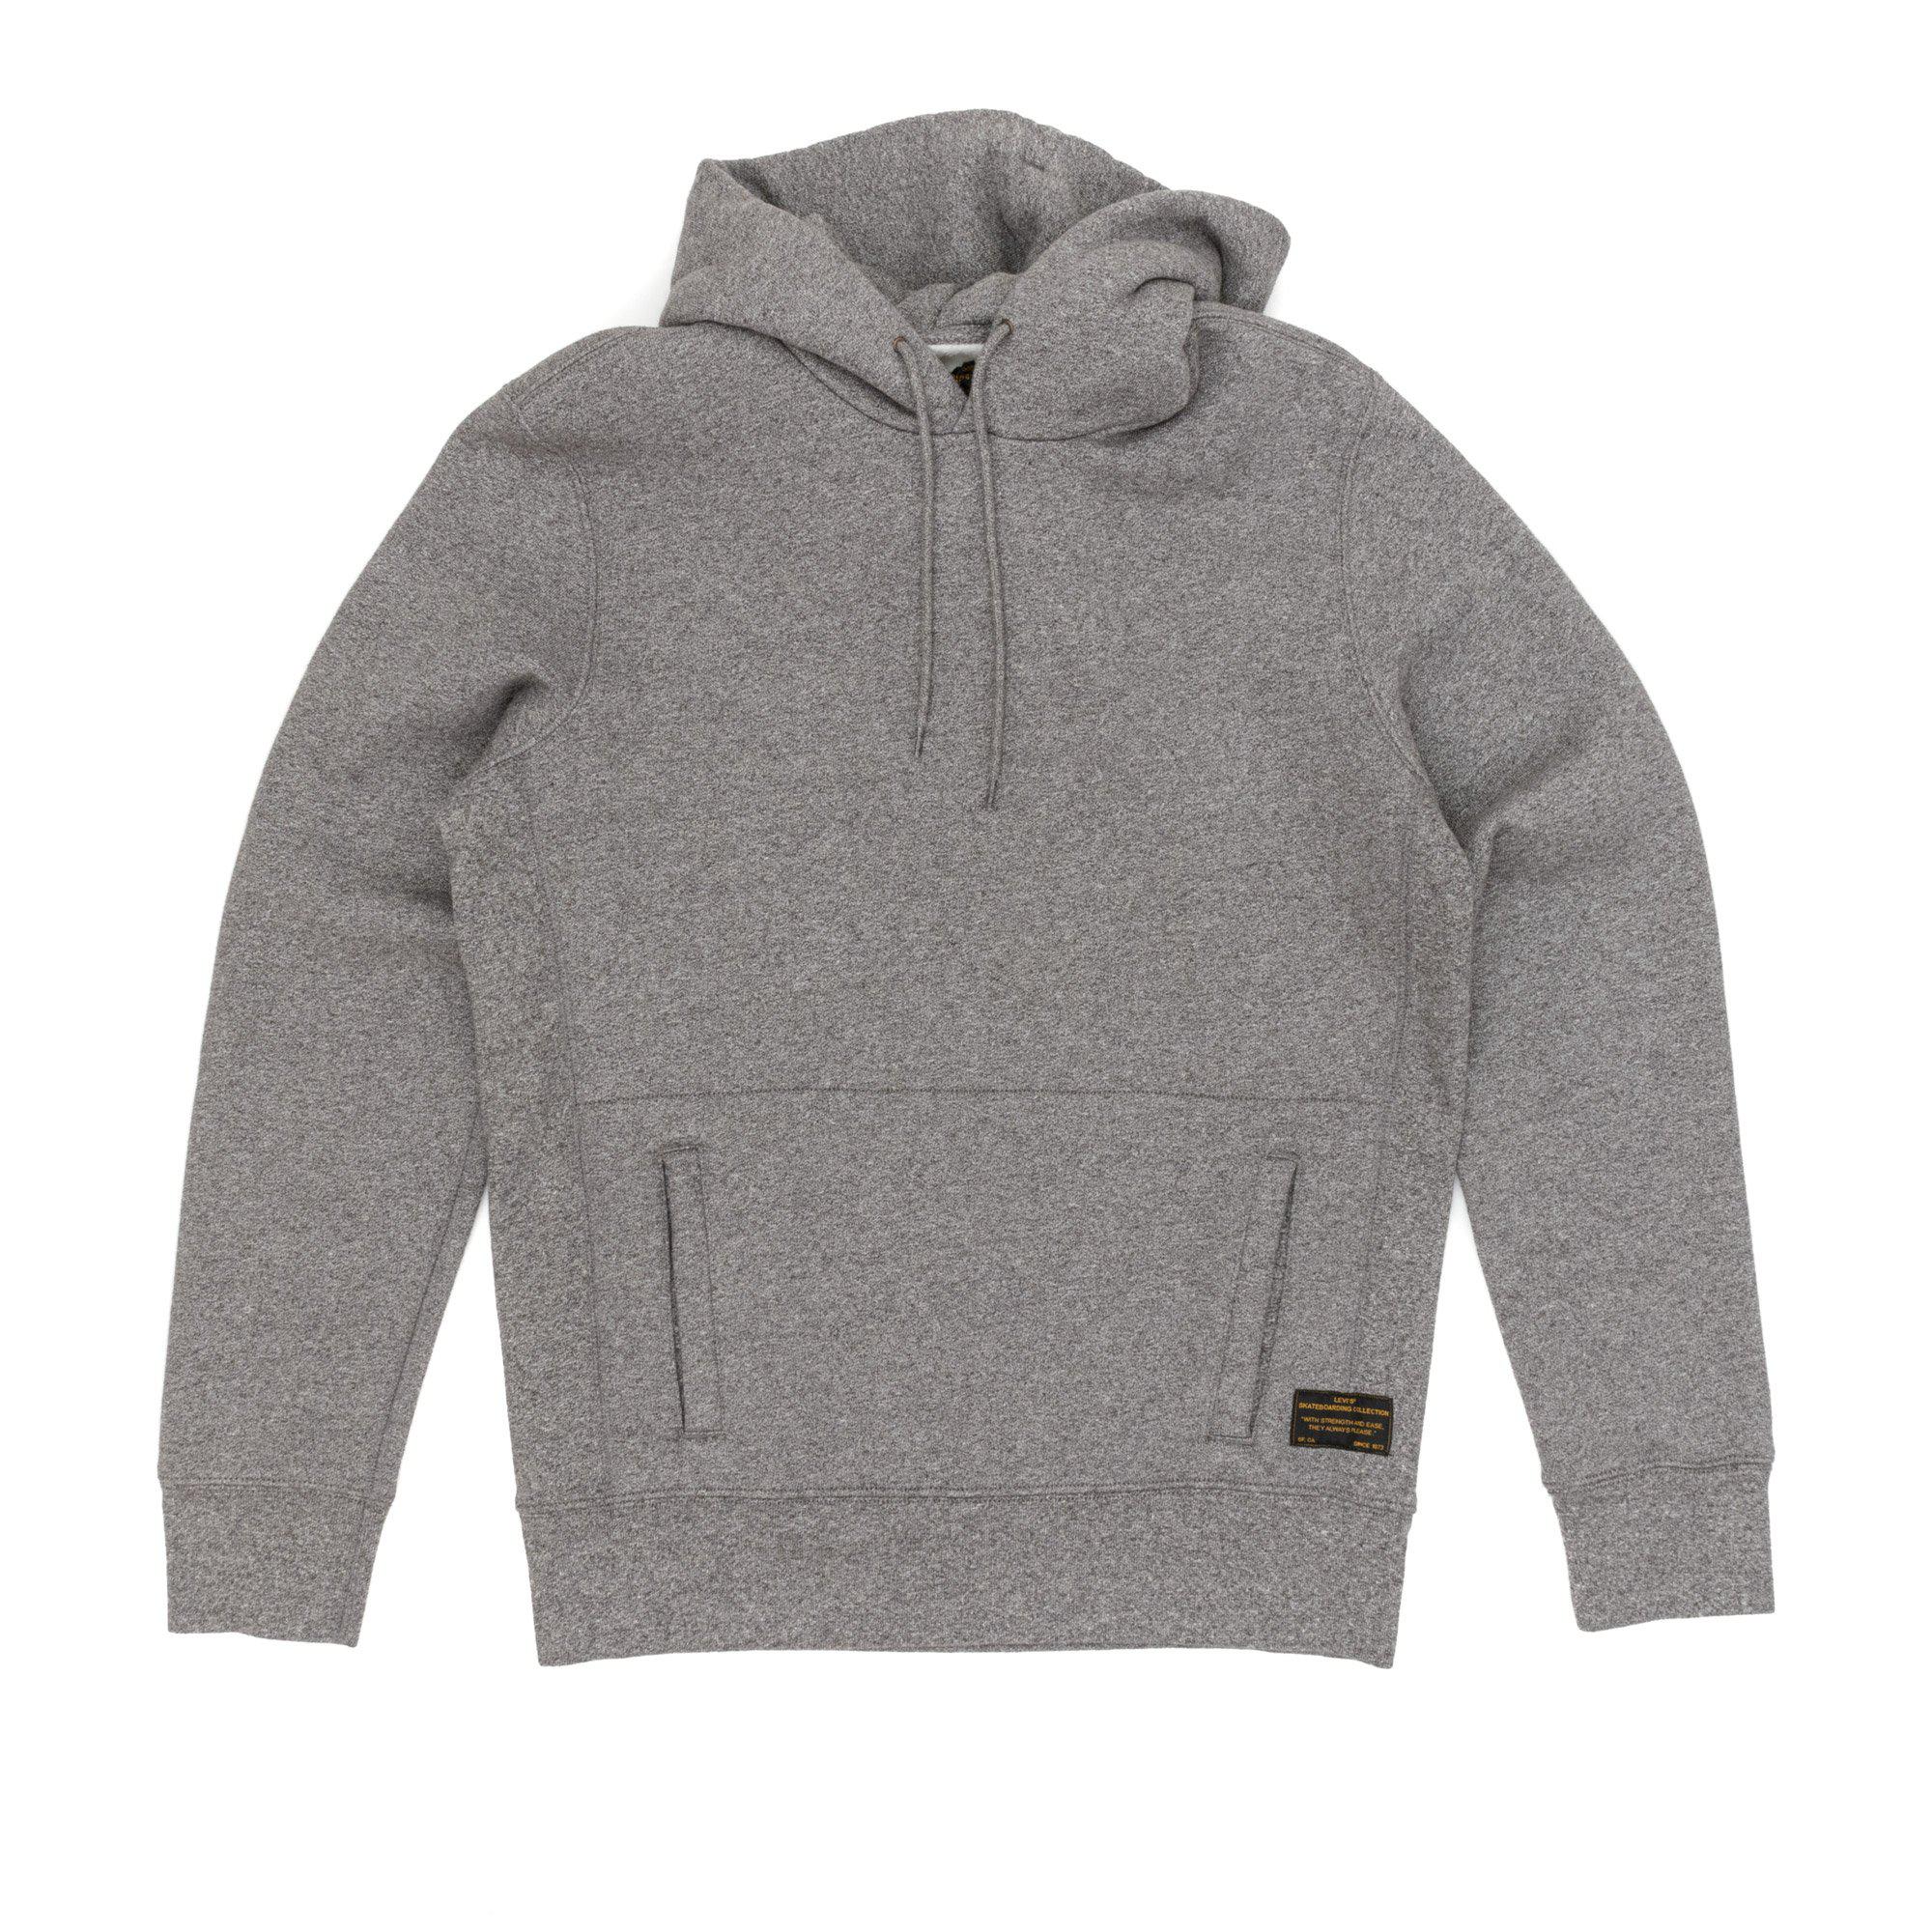 Levi's Cotton Pullover Hooded Sweatshirt in Grey (Gray) for Men - Lyst